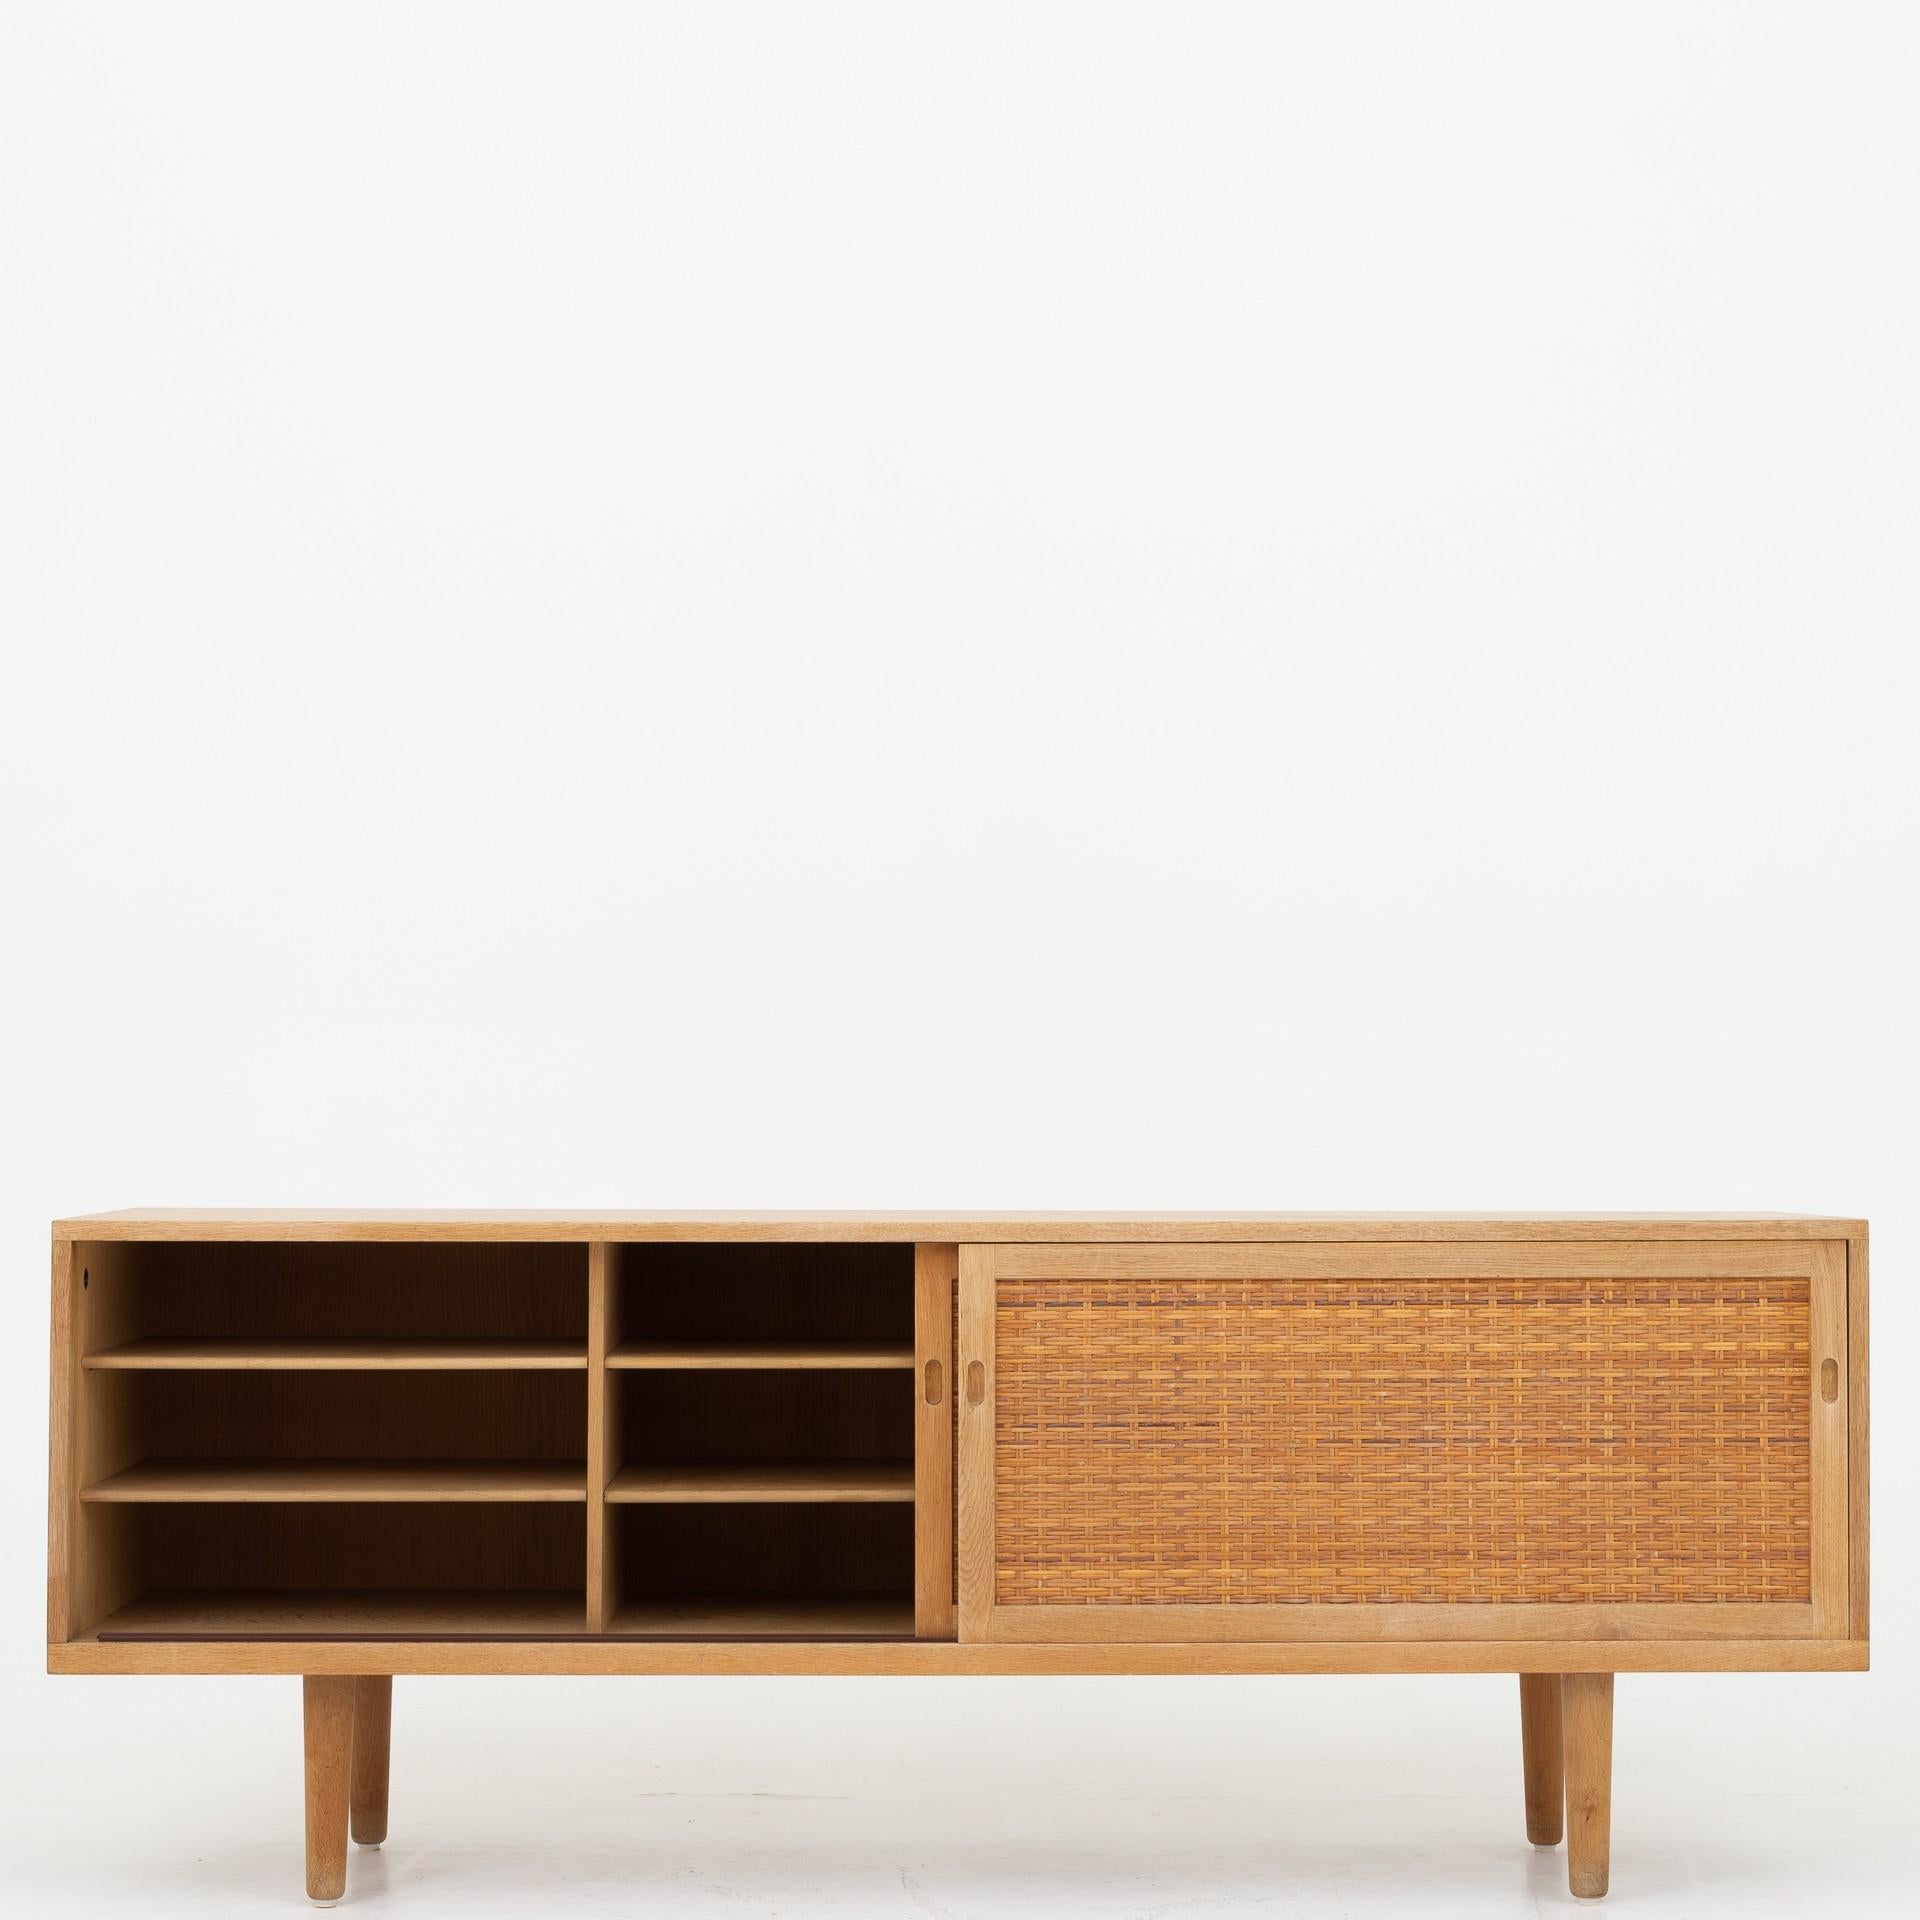 RY 26 - Sideboard in oak with two doors in cane and interior. Maker Ry møbler.